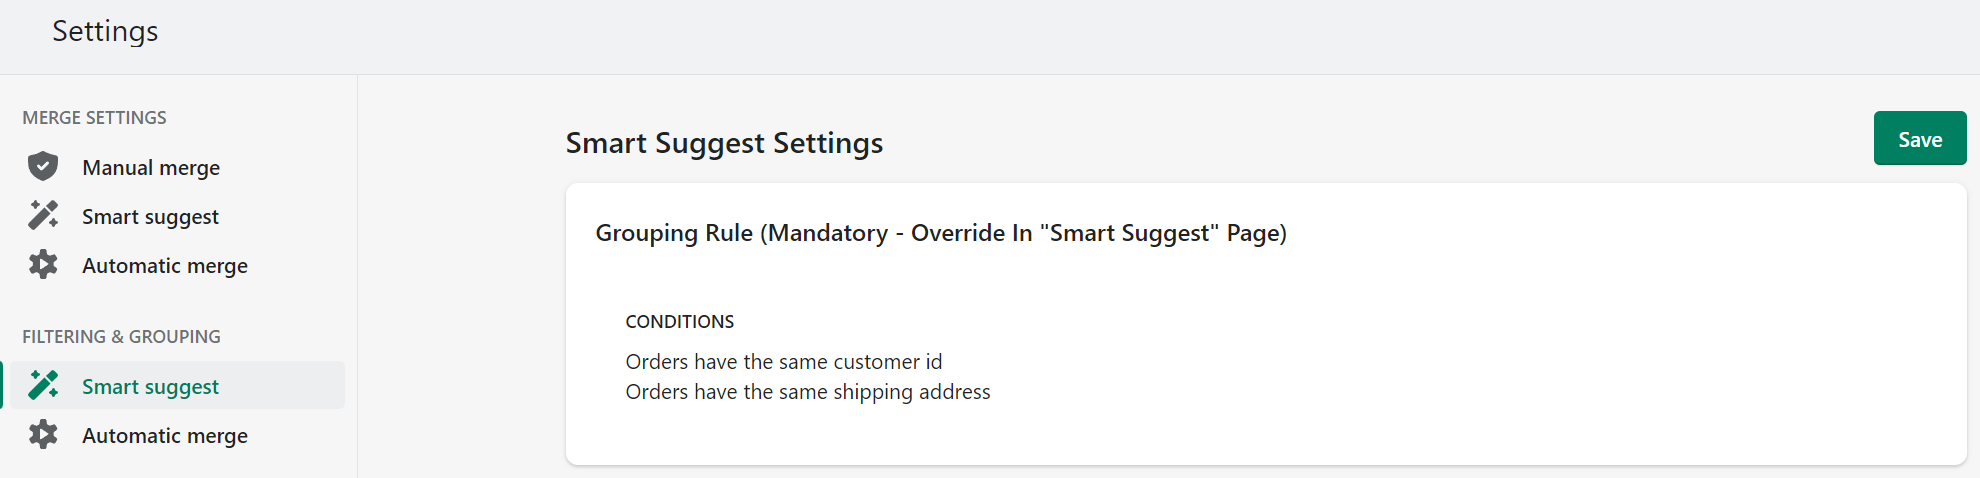 Grouping Rules in Settings